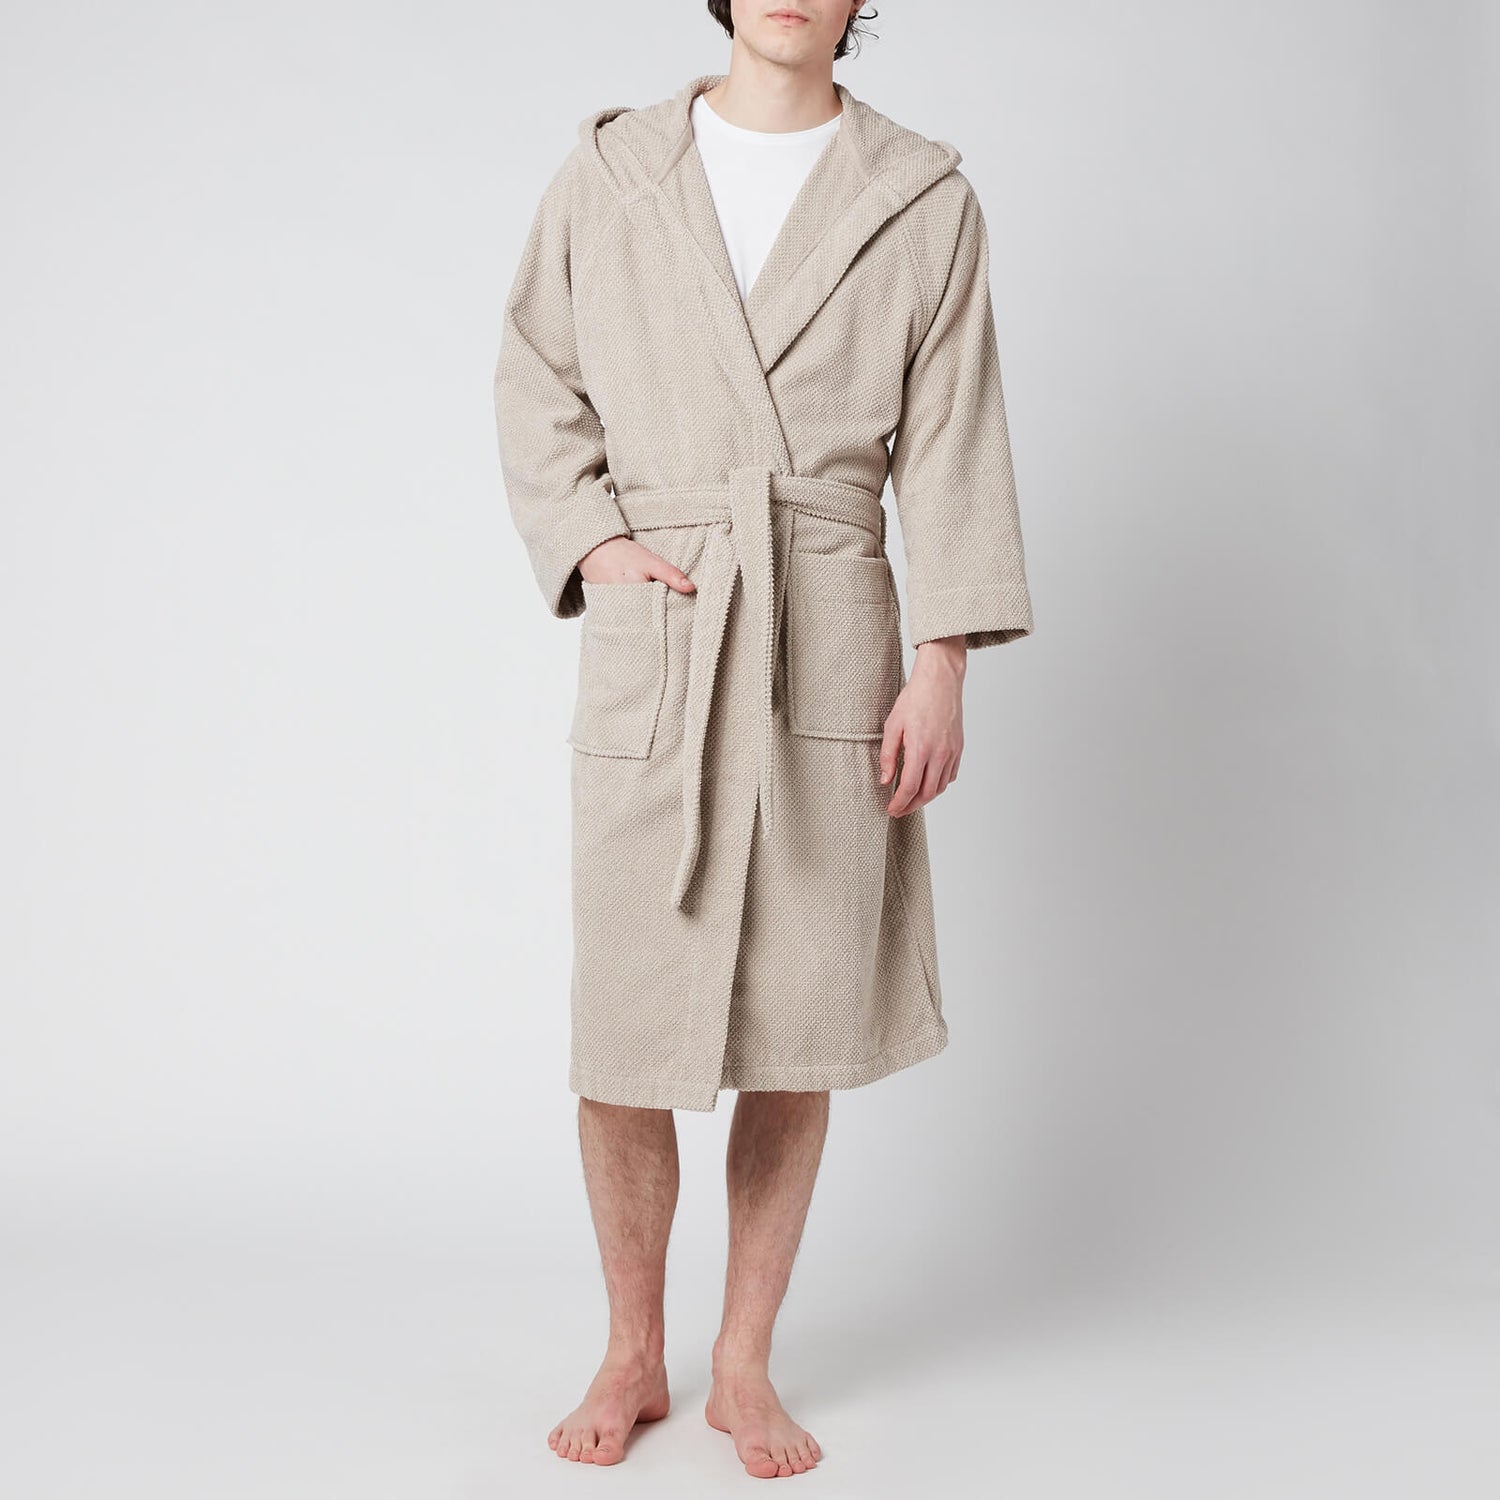 Christy Brixton Dressing Gown - Pebble - S